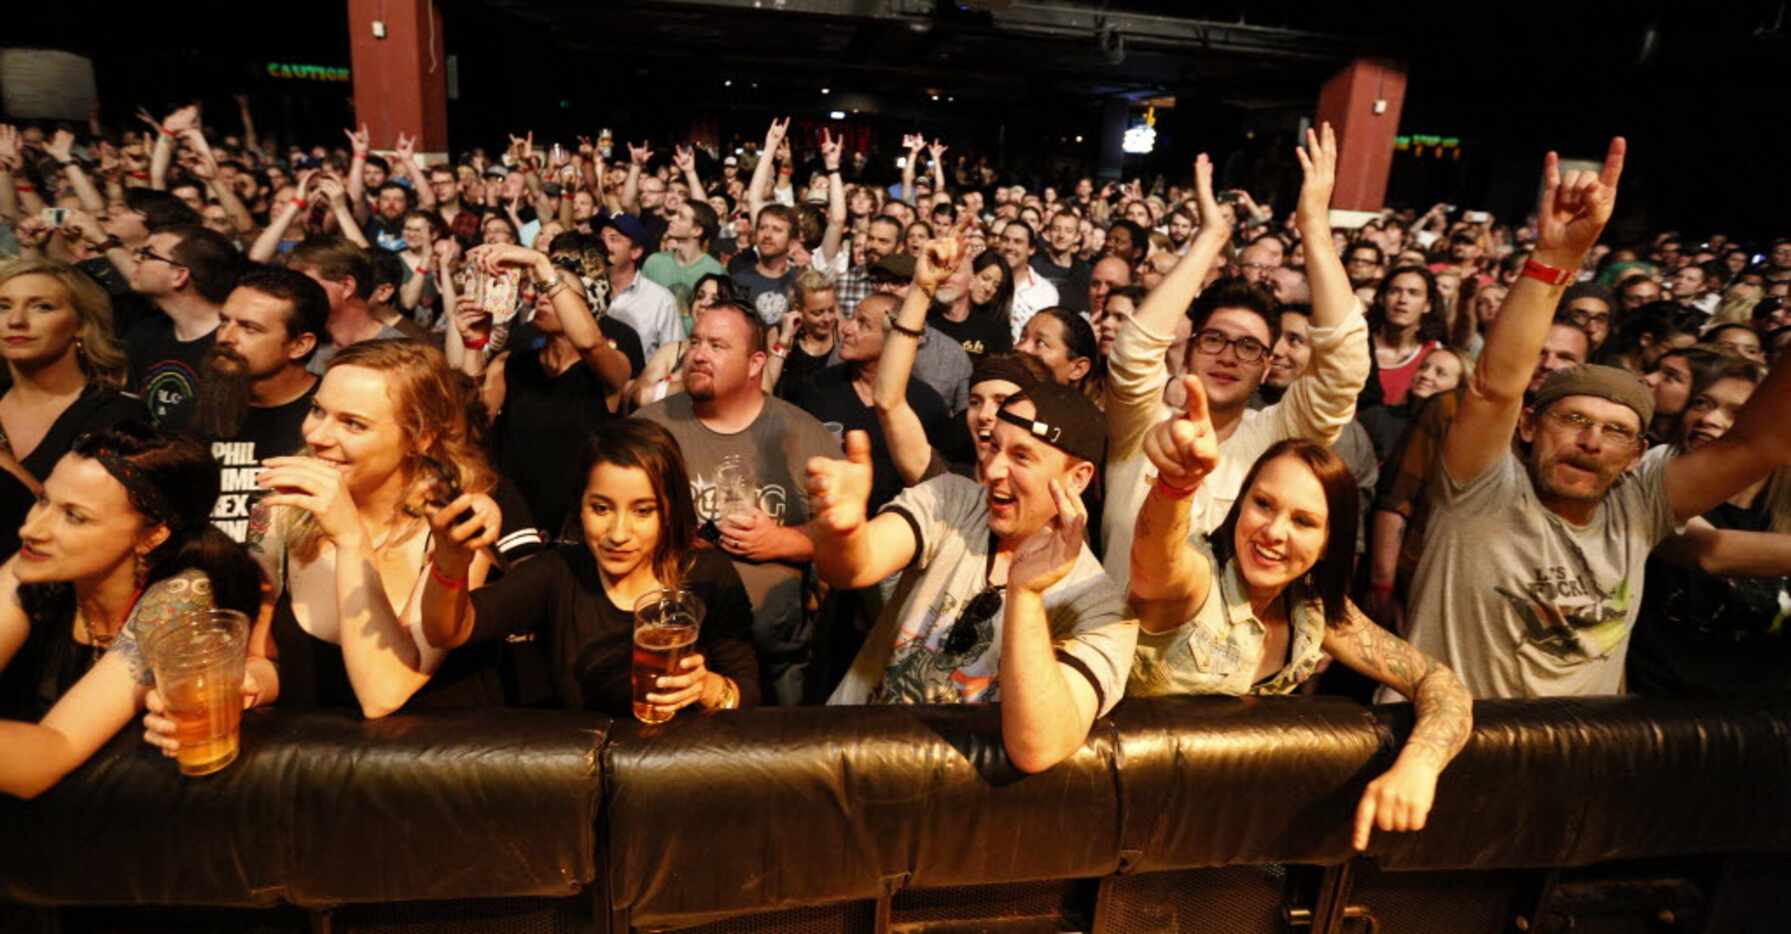 The crowd from Eagles of Death Metal performing at House of Blues in Dallas, TX May 22,...